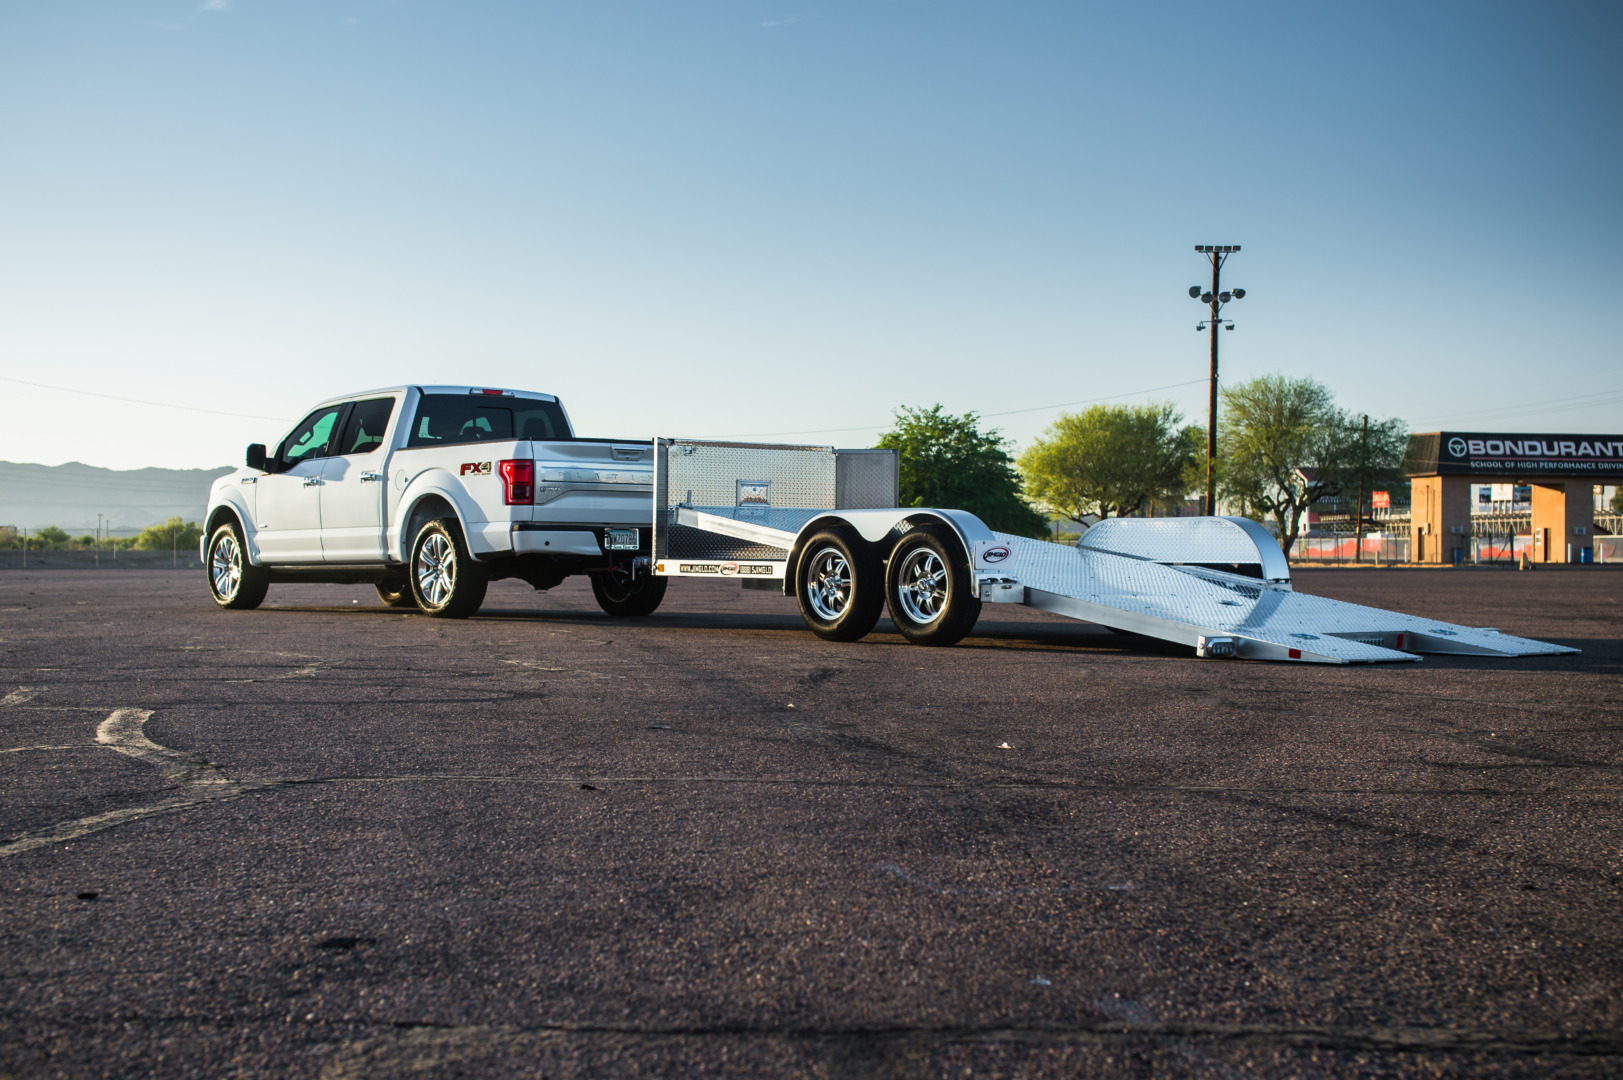 Jimglo Ego Tilt Bed Trailer With The Bed Down Behind A White Ford F150